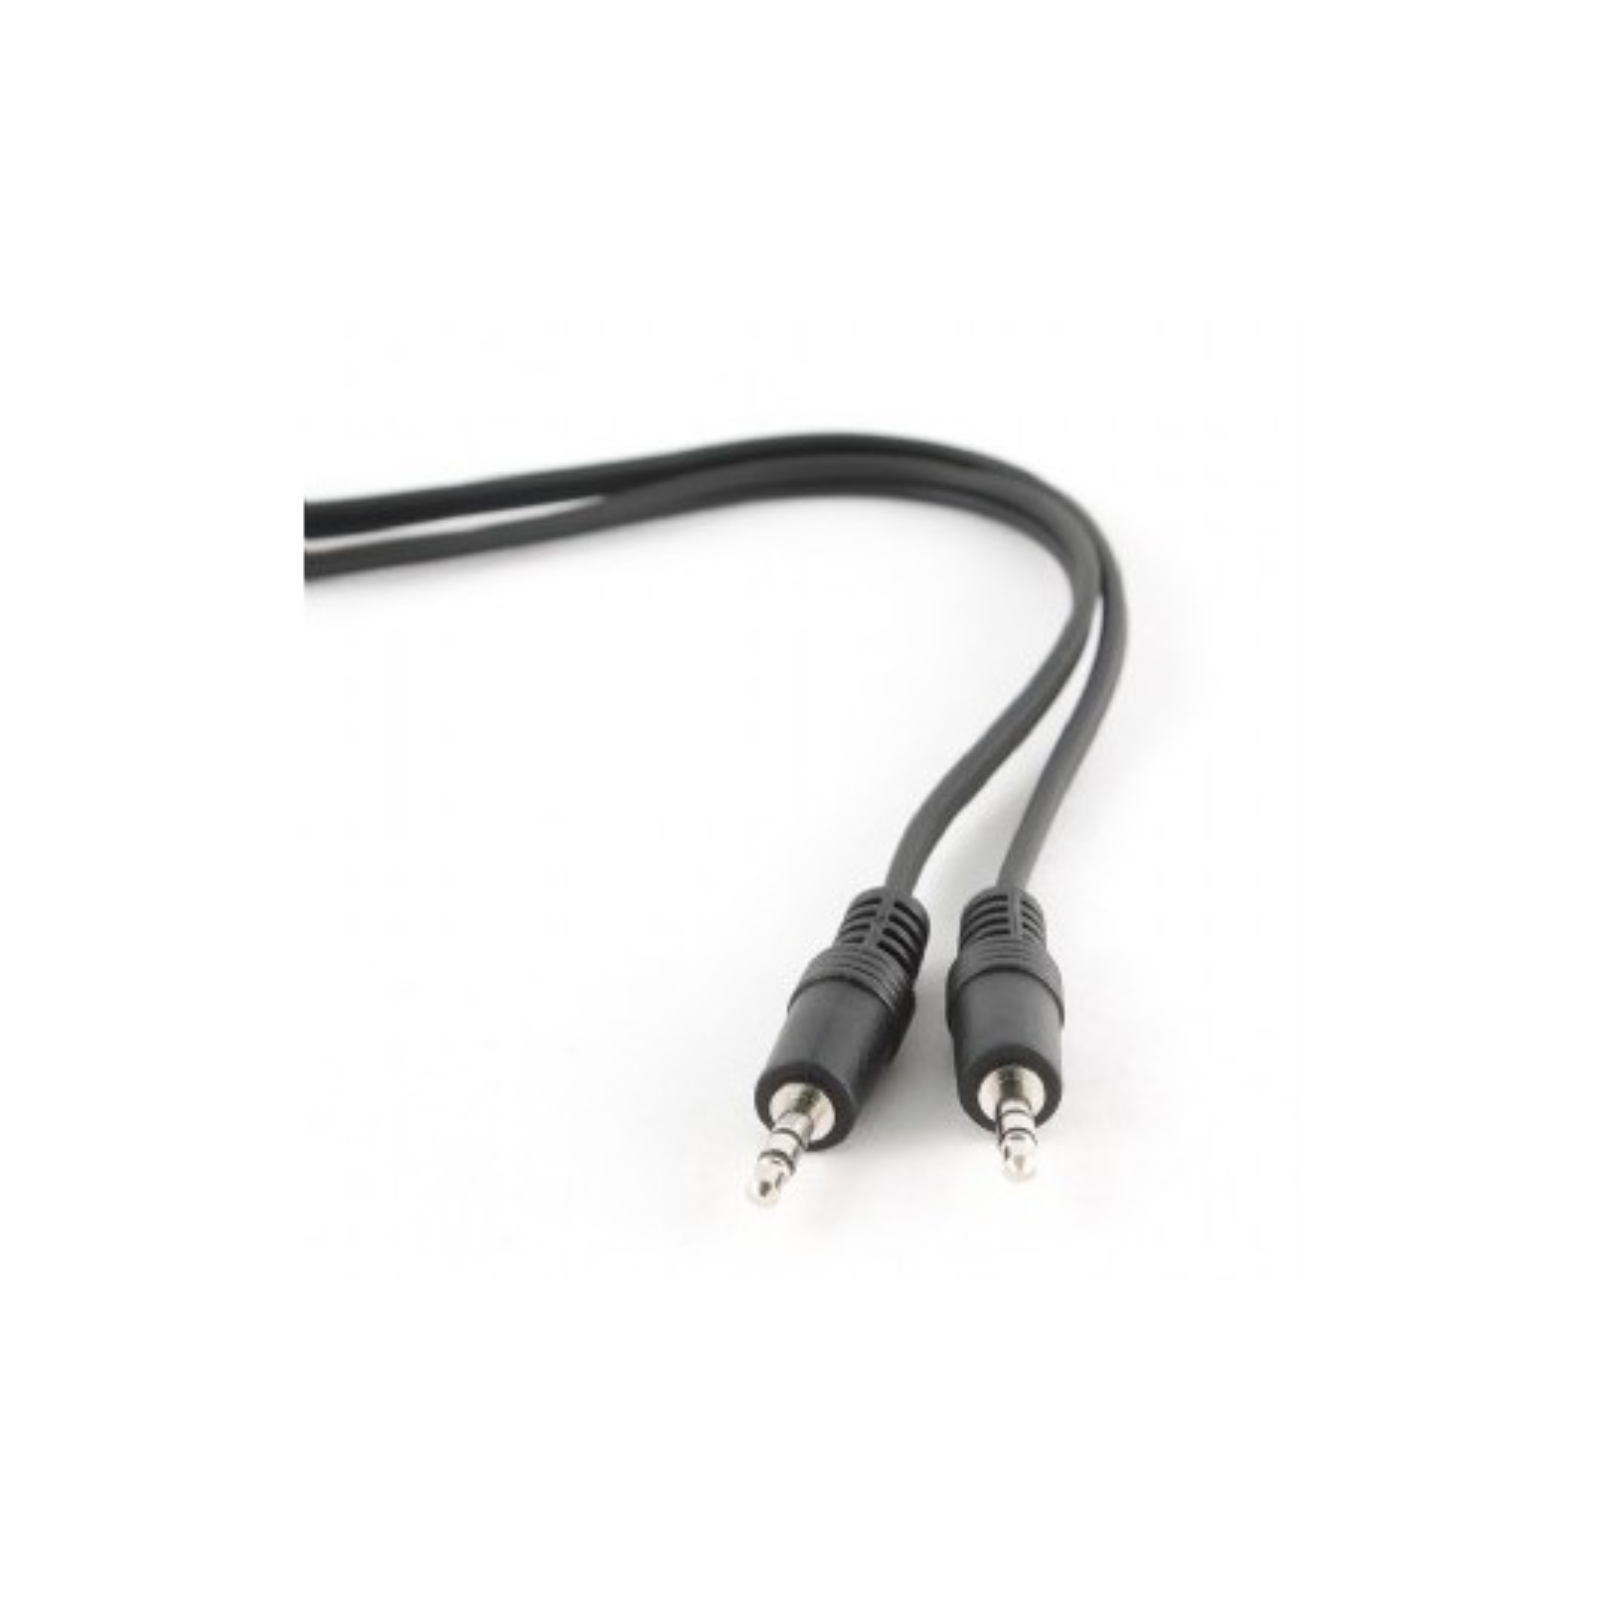 CABLE AUDIO GEMBIRD CONECTOR 35MM 10M